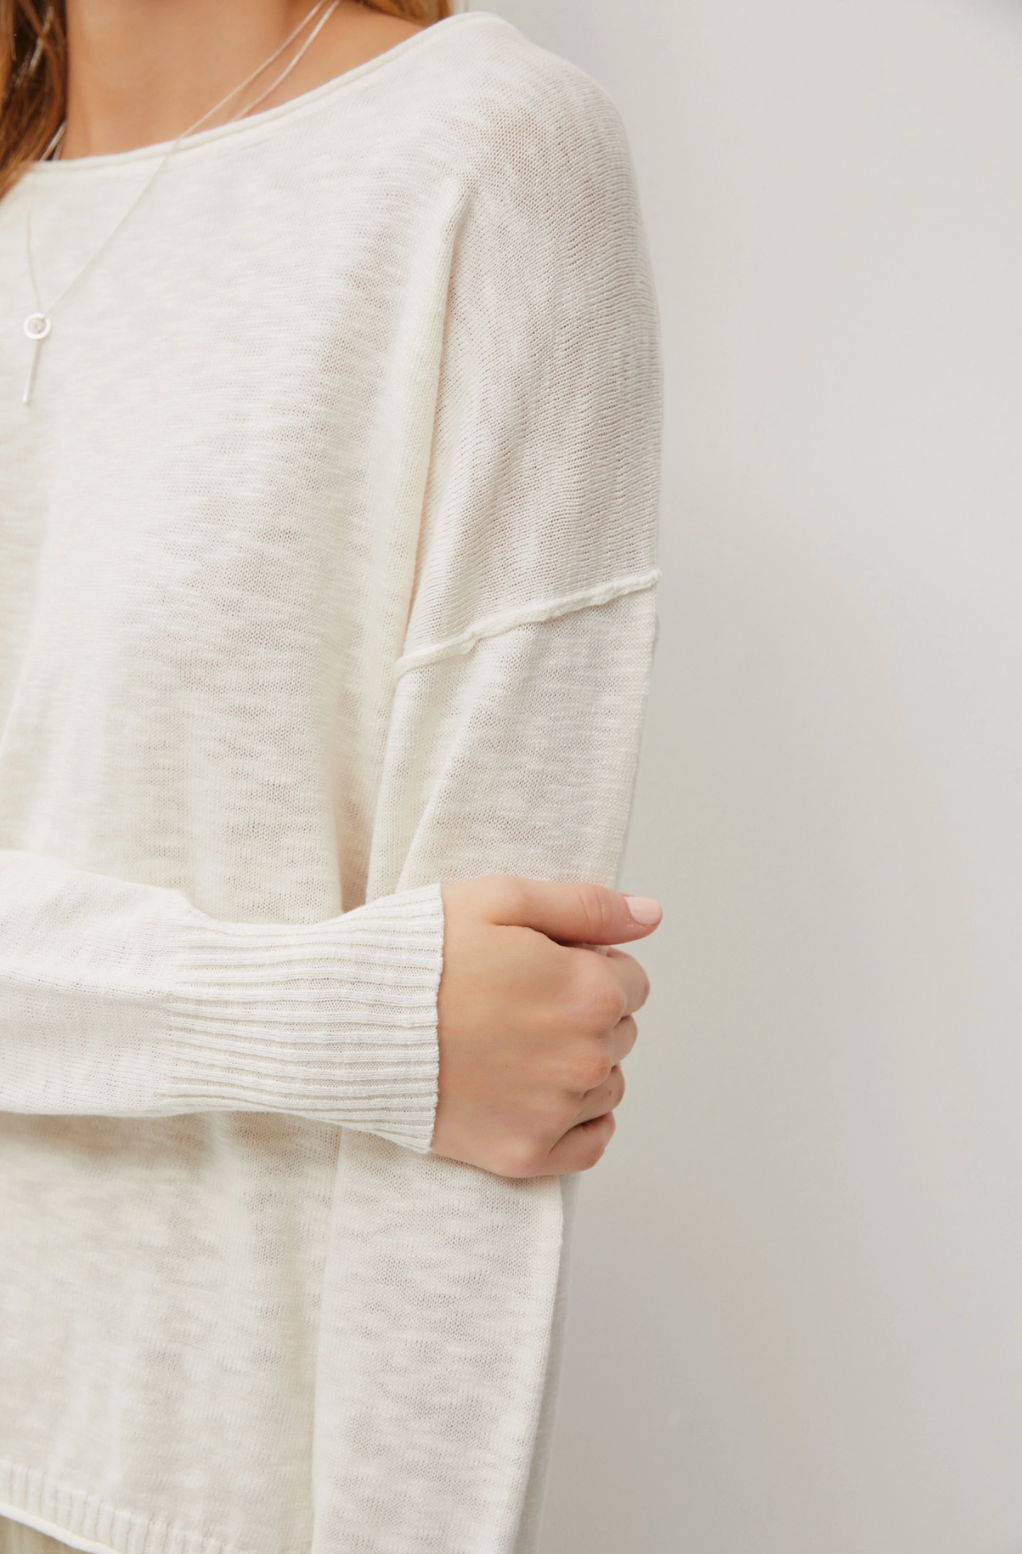 Inside Out Pullover Sweater